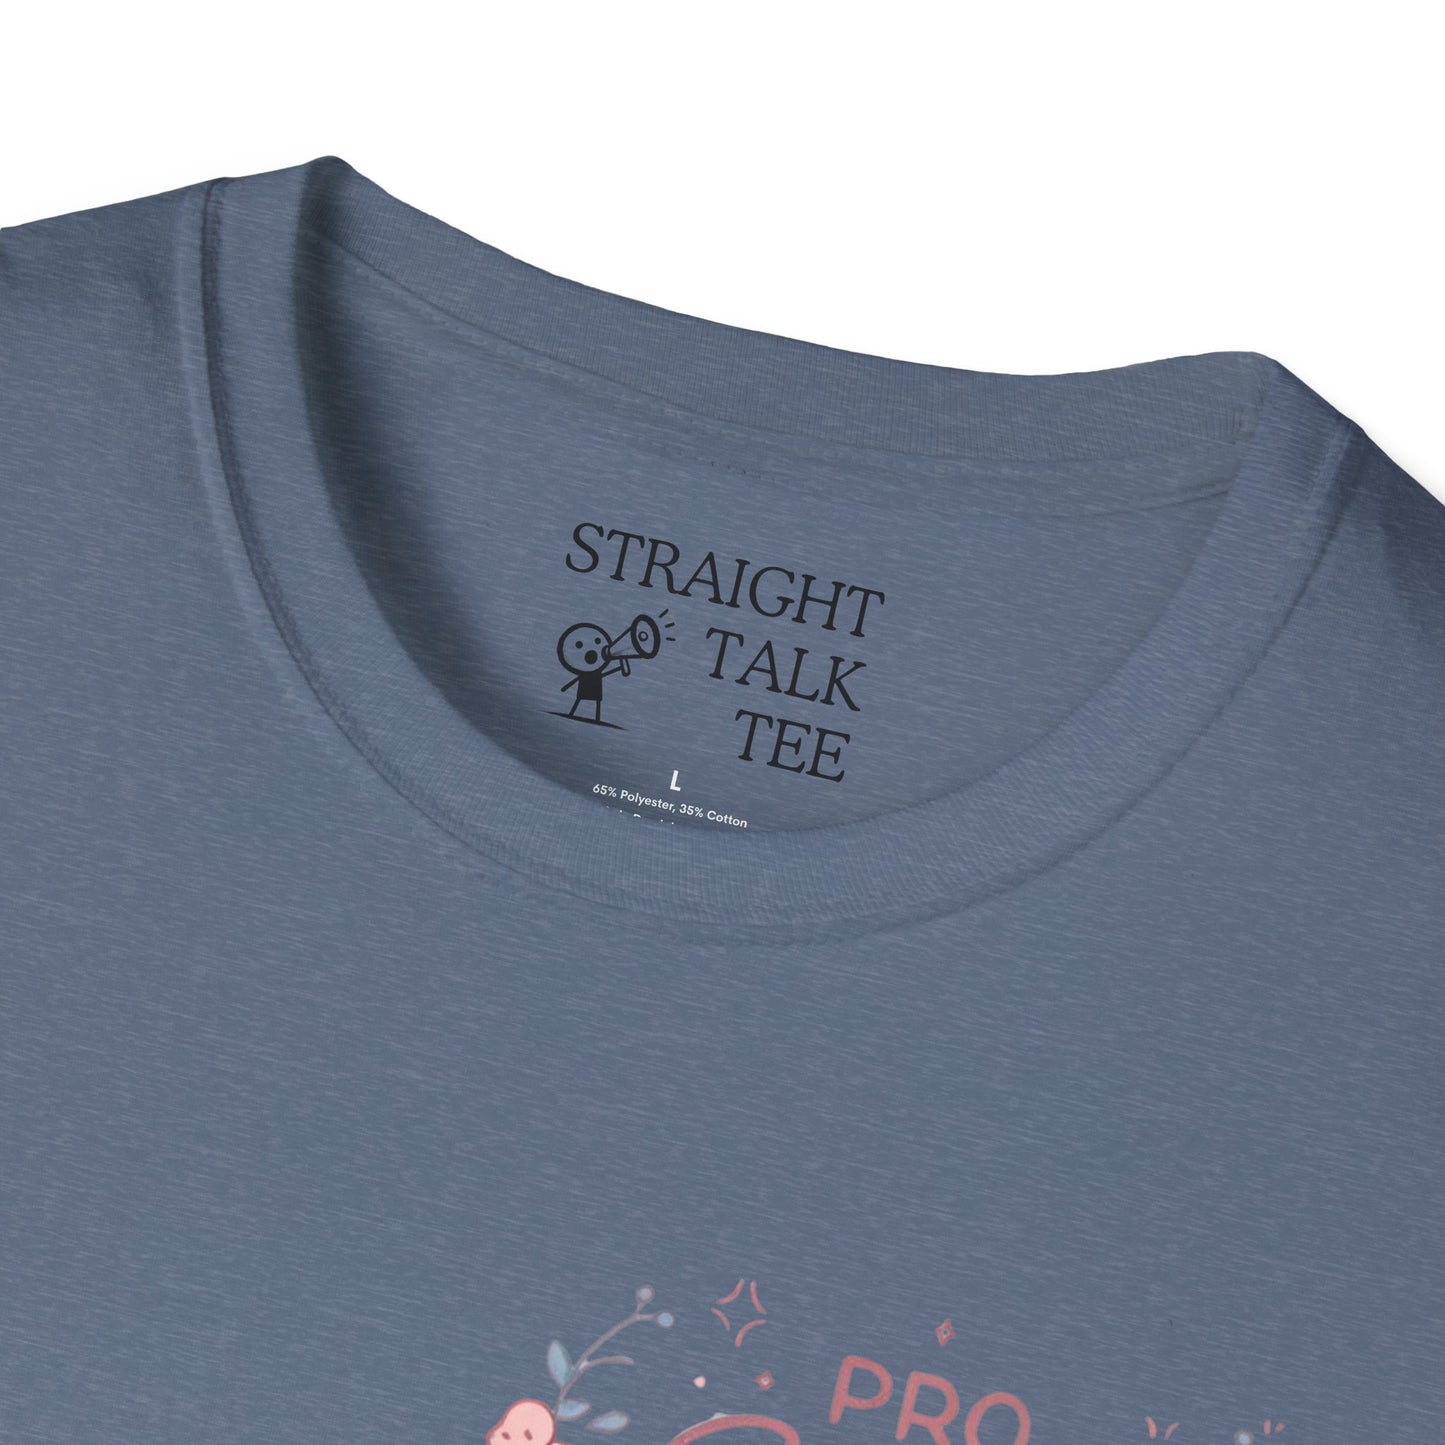 Pro-Choice Voter Soft-Style t-shirt |unisex| Clear and Bold Statement, Won't be Silent Anymore!